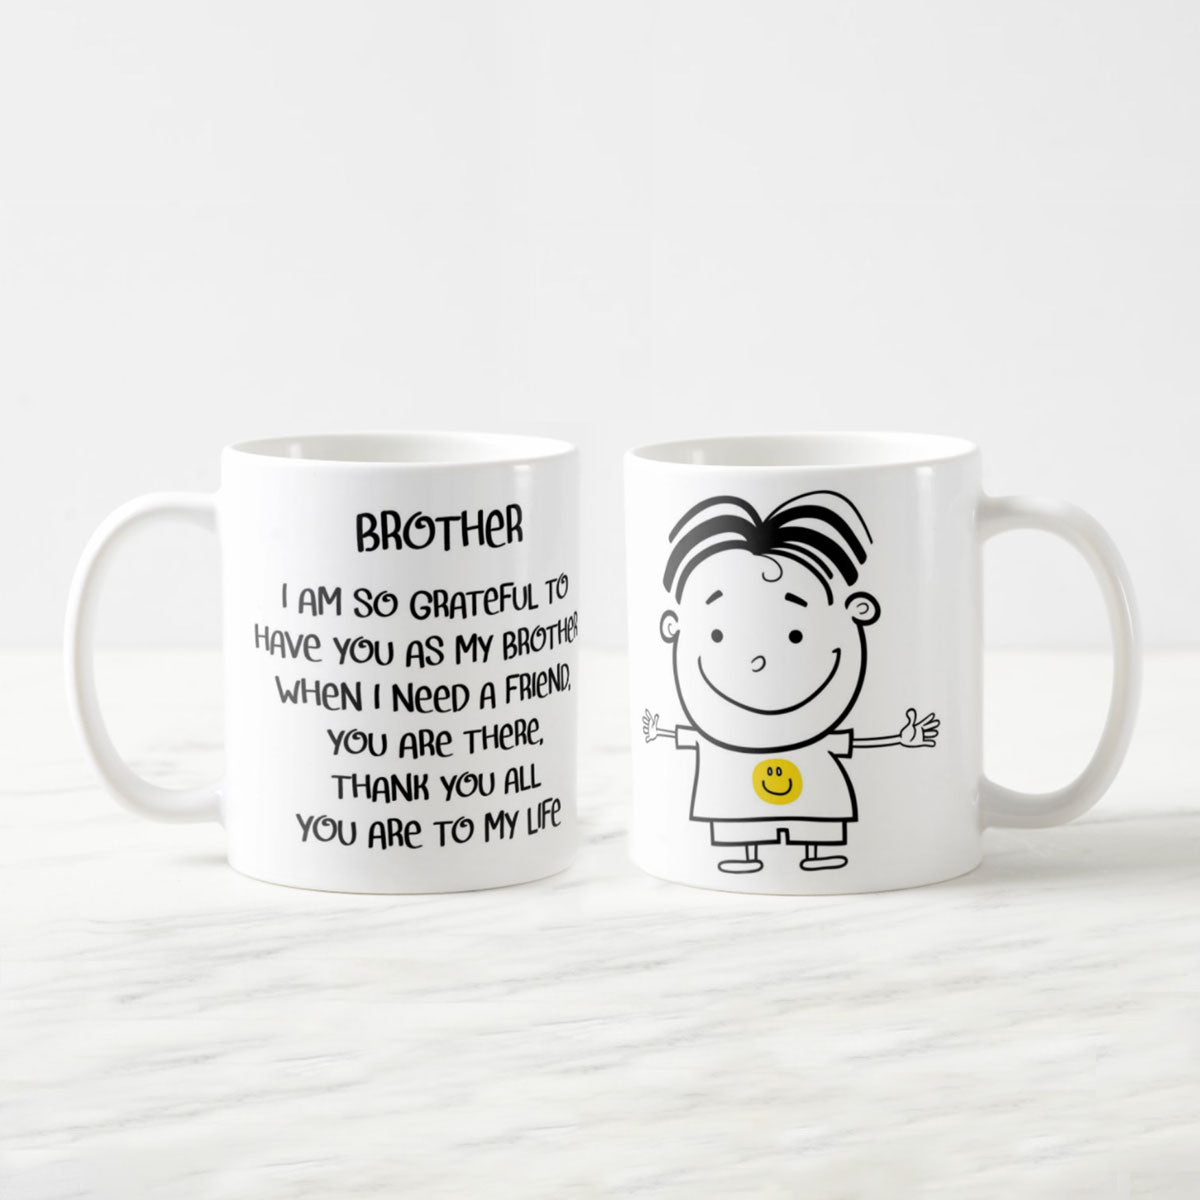 I am Grateful to have you as my Brother Mug